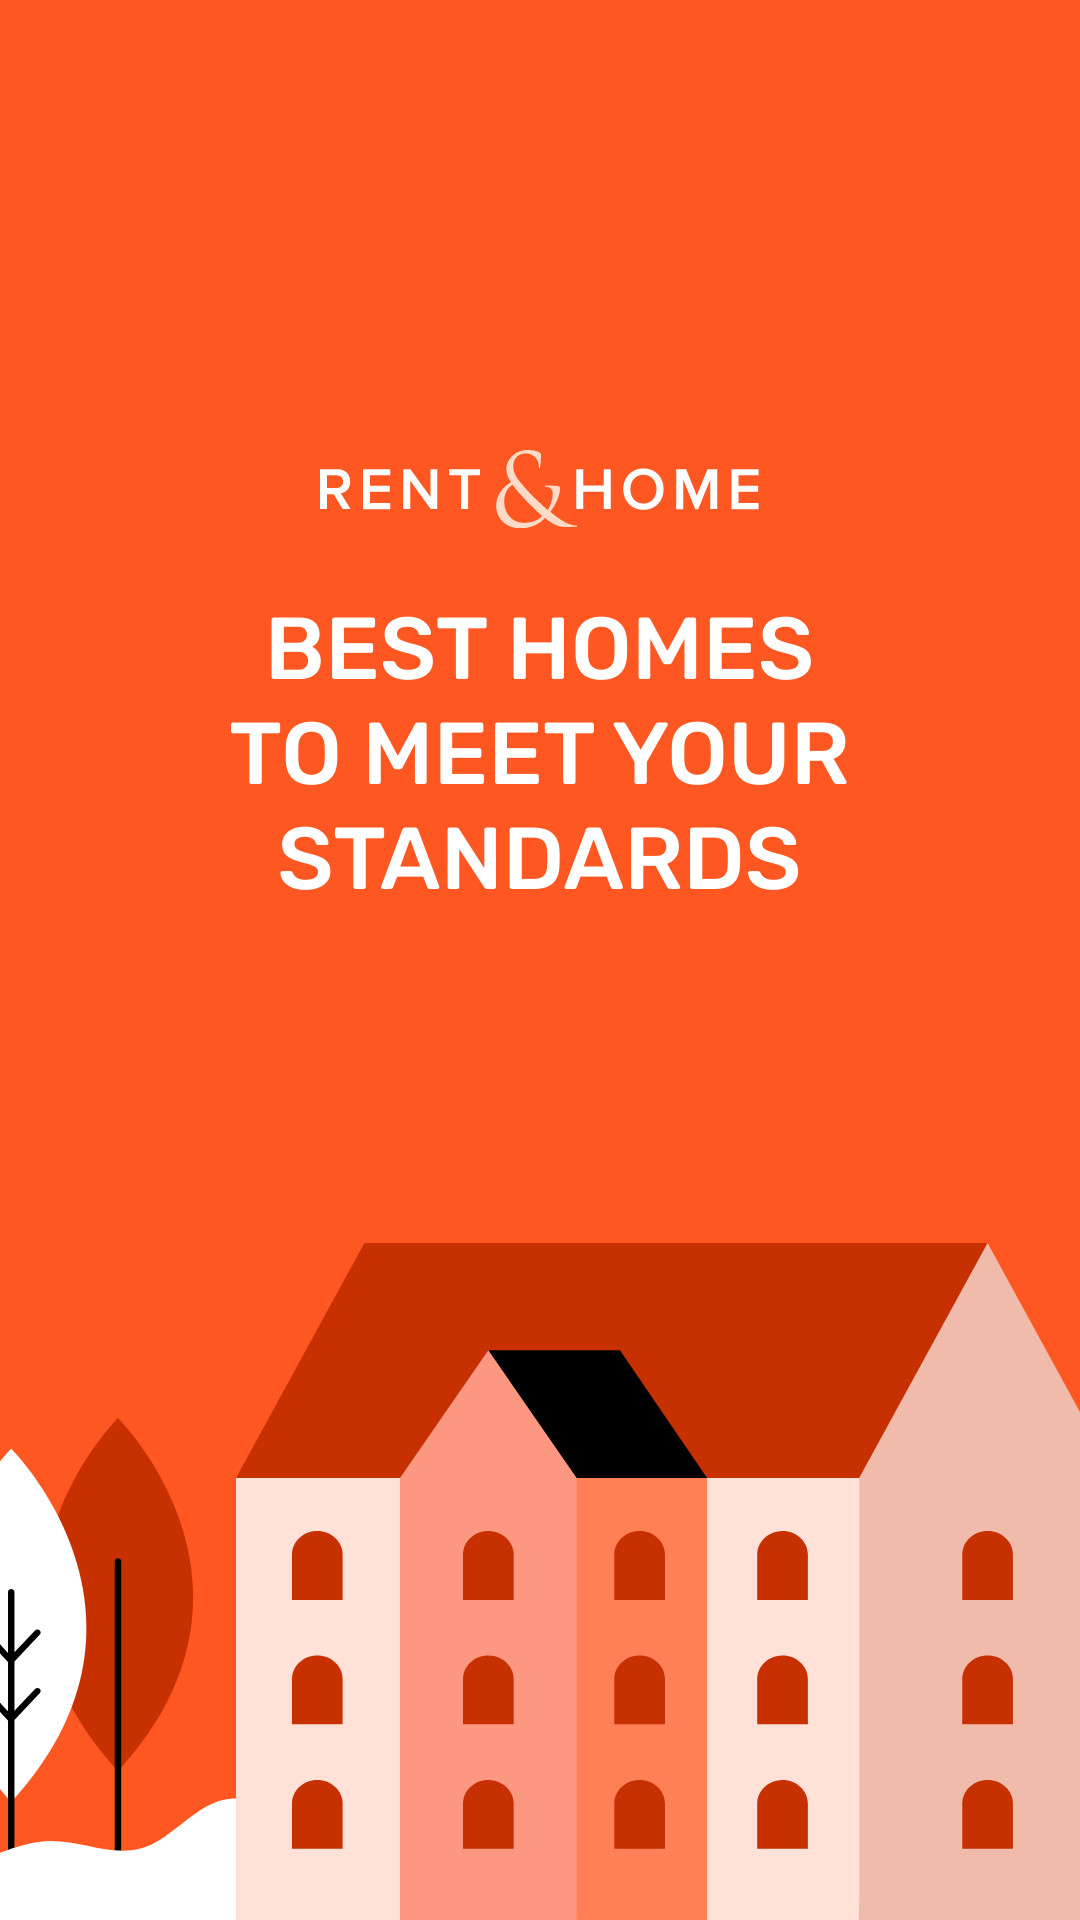 Best Homes to Meet Your Standards Inline Rectangle 300x250